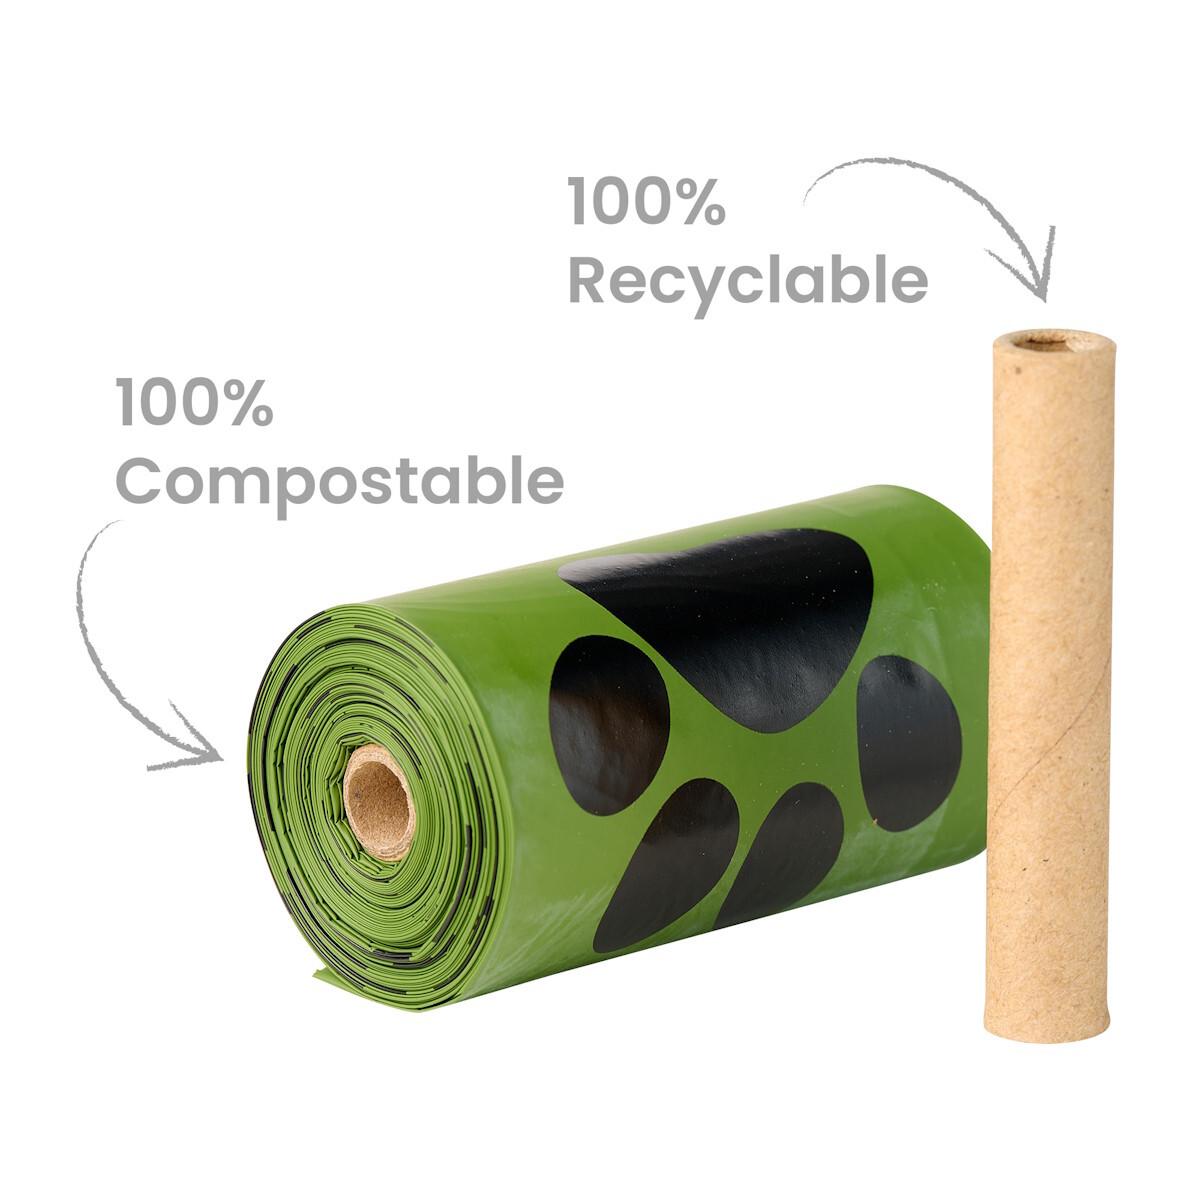 Oh Crap Compostable Dog Poop Bags - 12 Boxes x 4 Rolls per Box (48 rolls) image 0